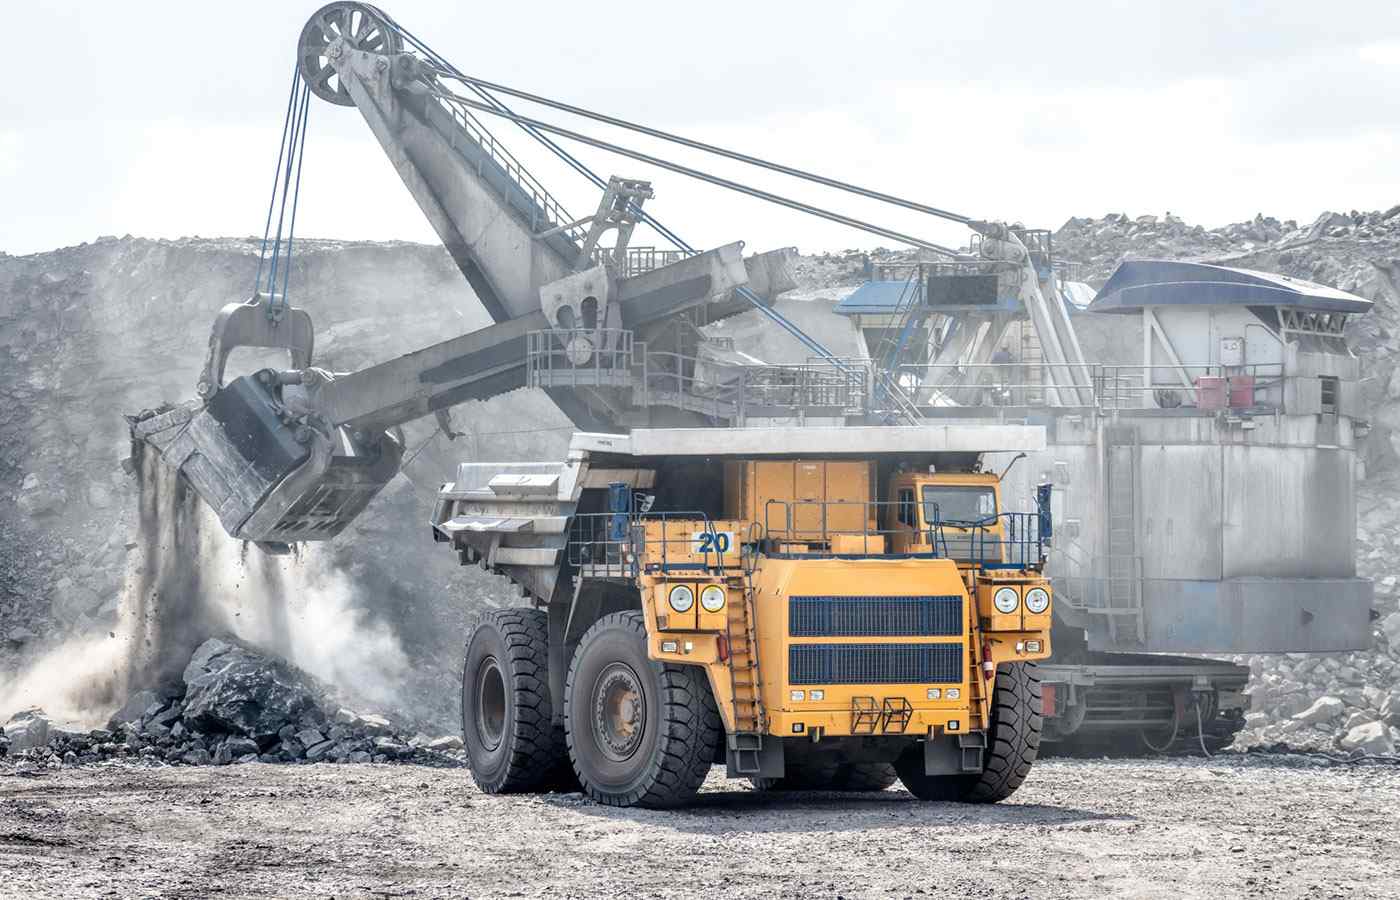 diggers extracting materials from the ground at a mining site